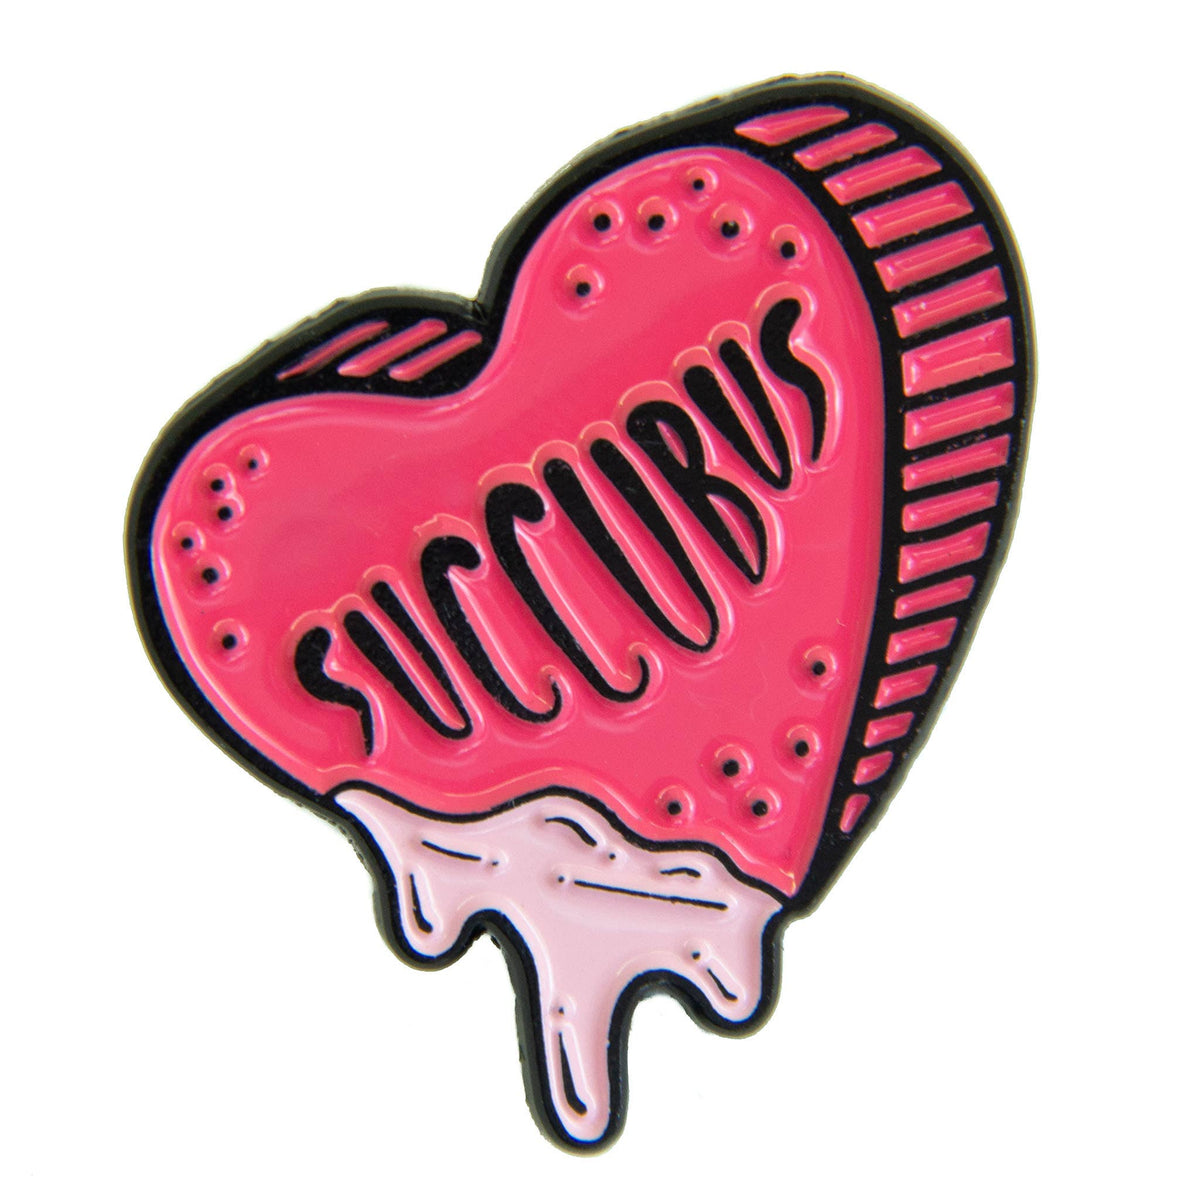 Succubus Oozing Pink Candy Heart Enamel Pin